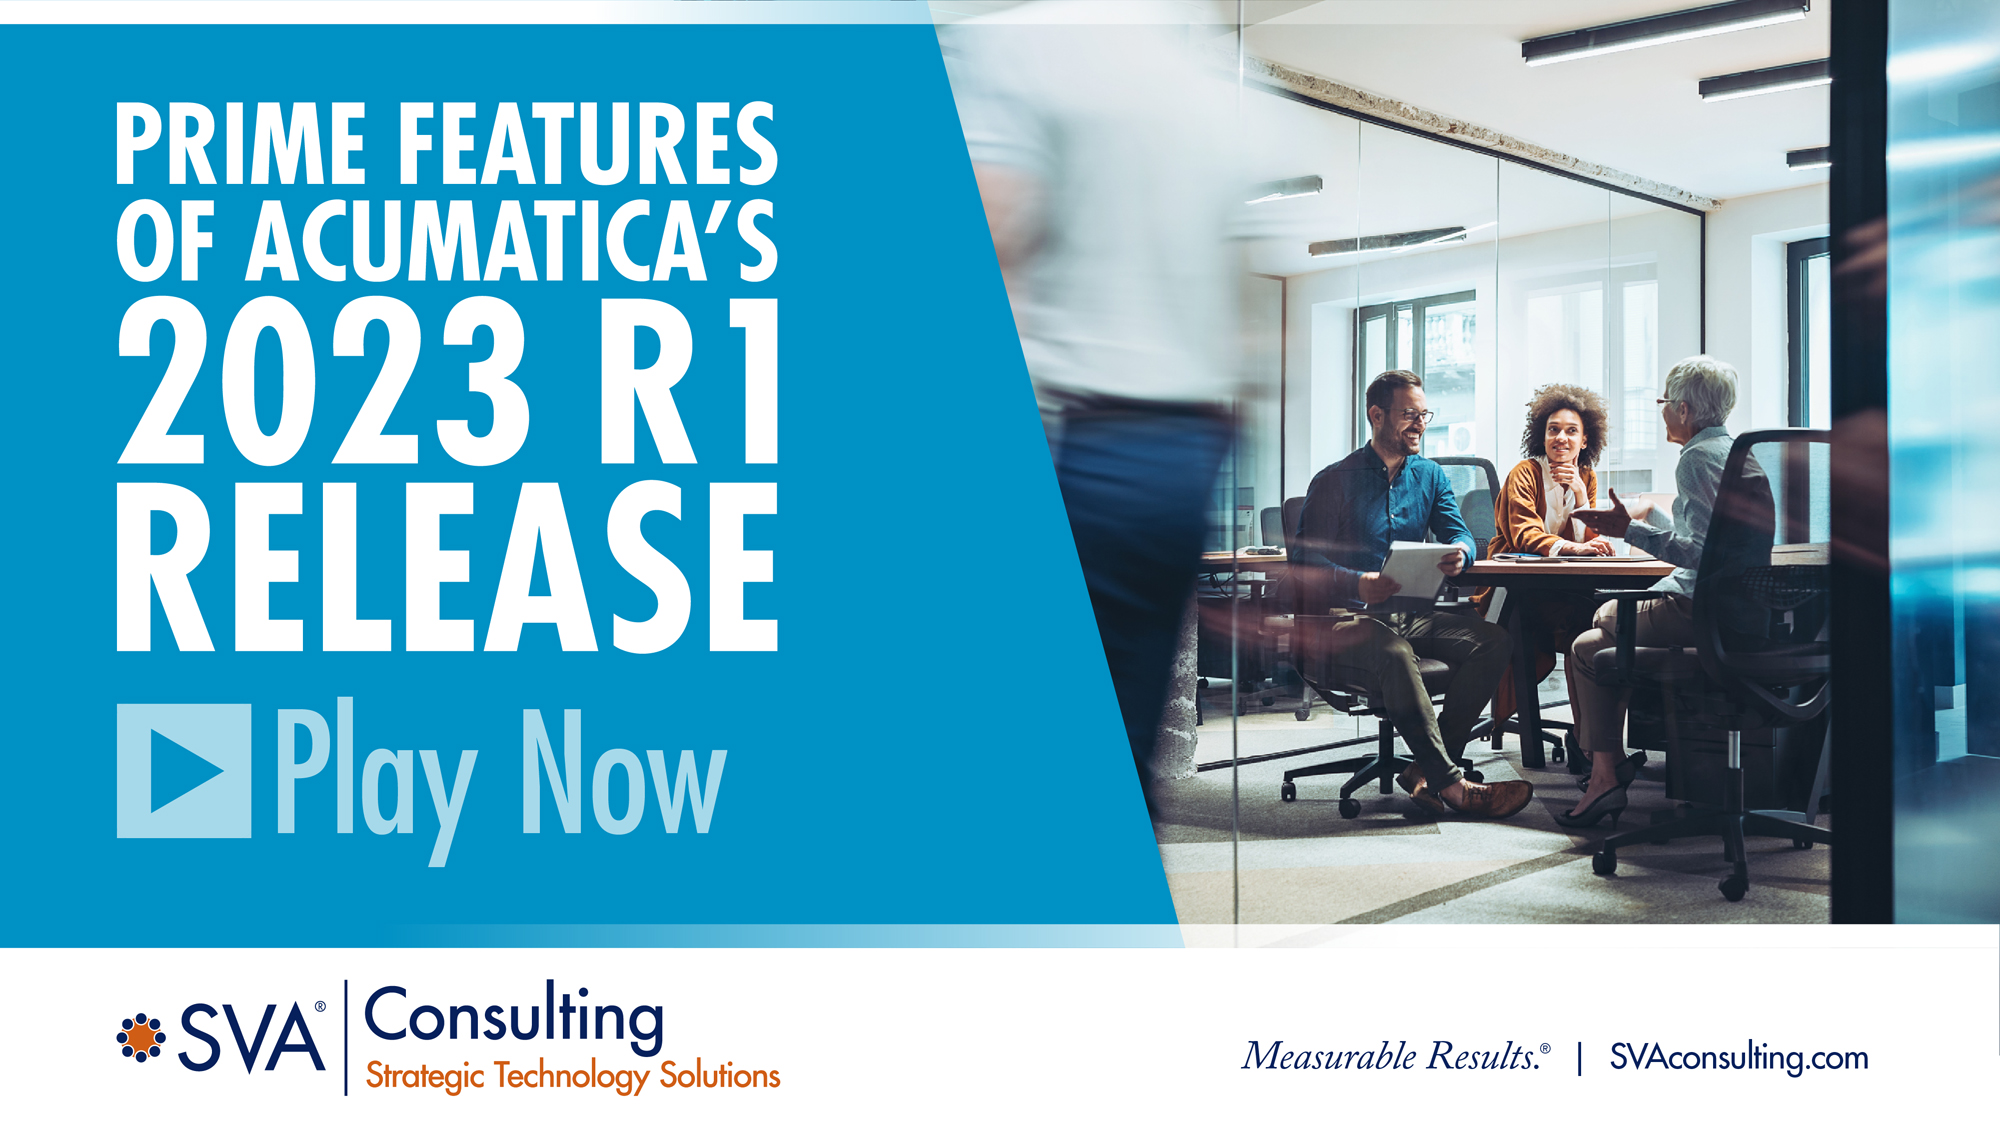 Prime Features of Acumatica’s 2023 R1 Release